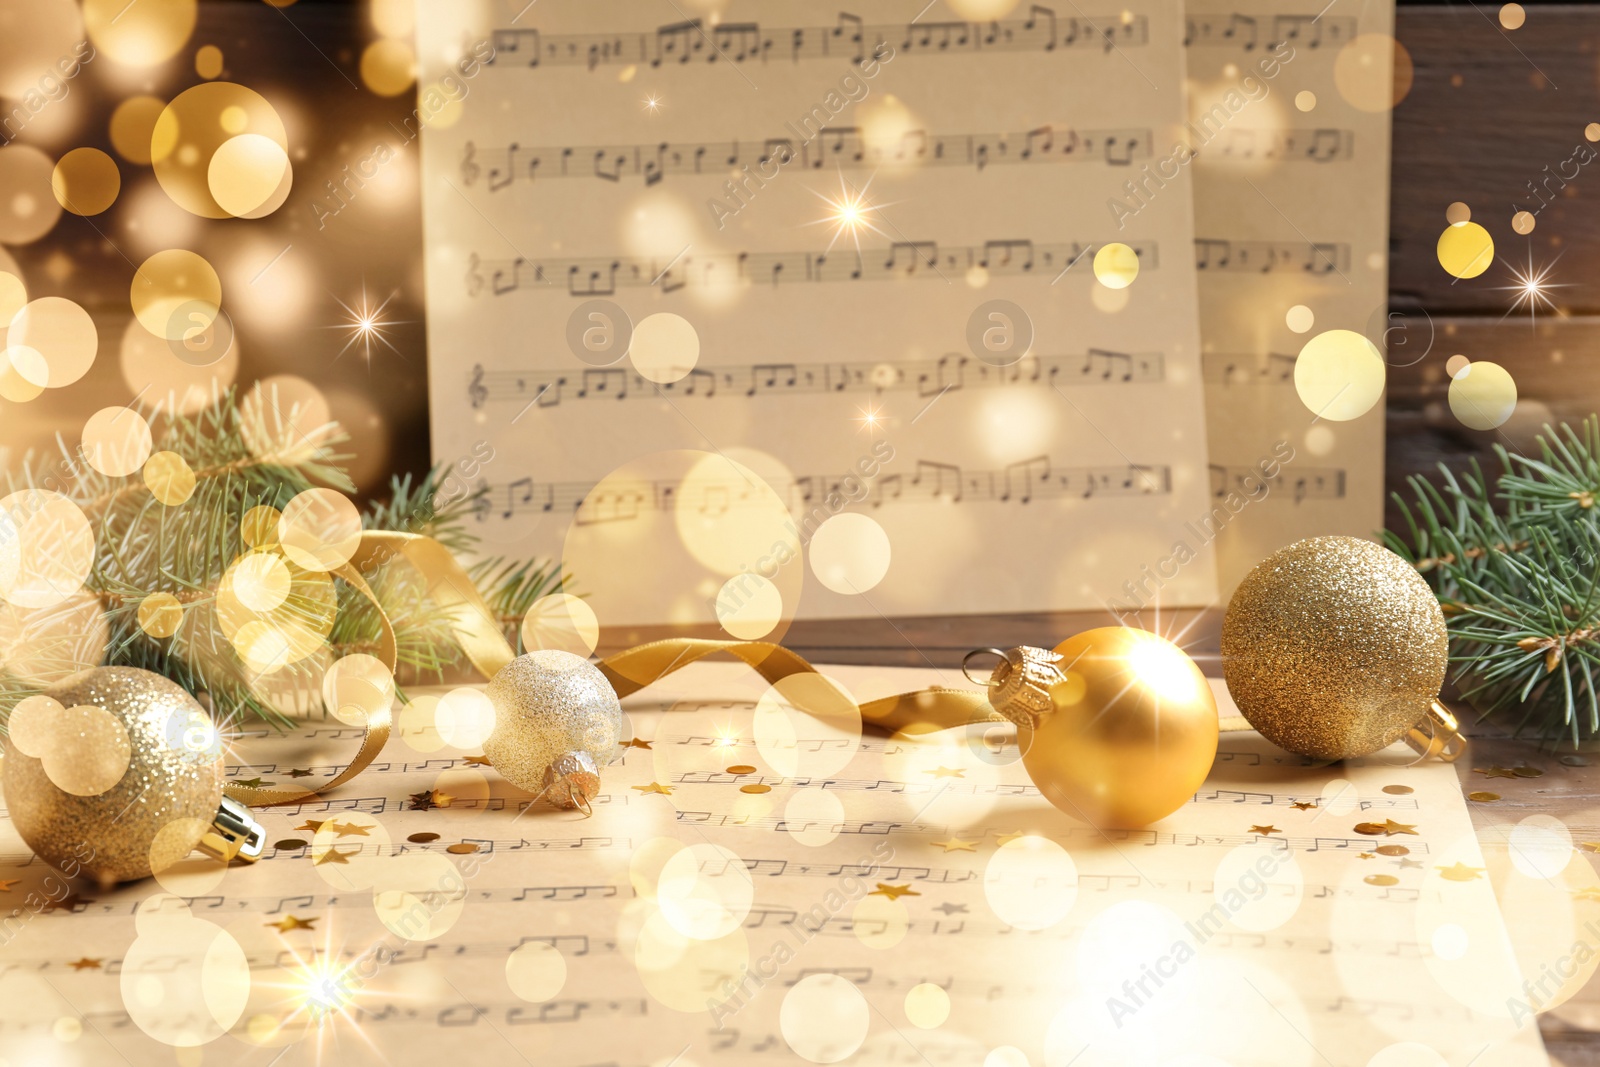 Image of Composition with Christmas decorations and music sheets on table. Bokeh effect